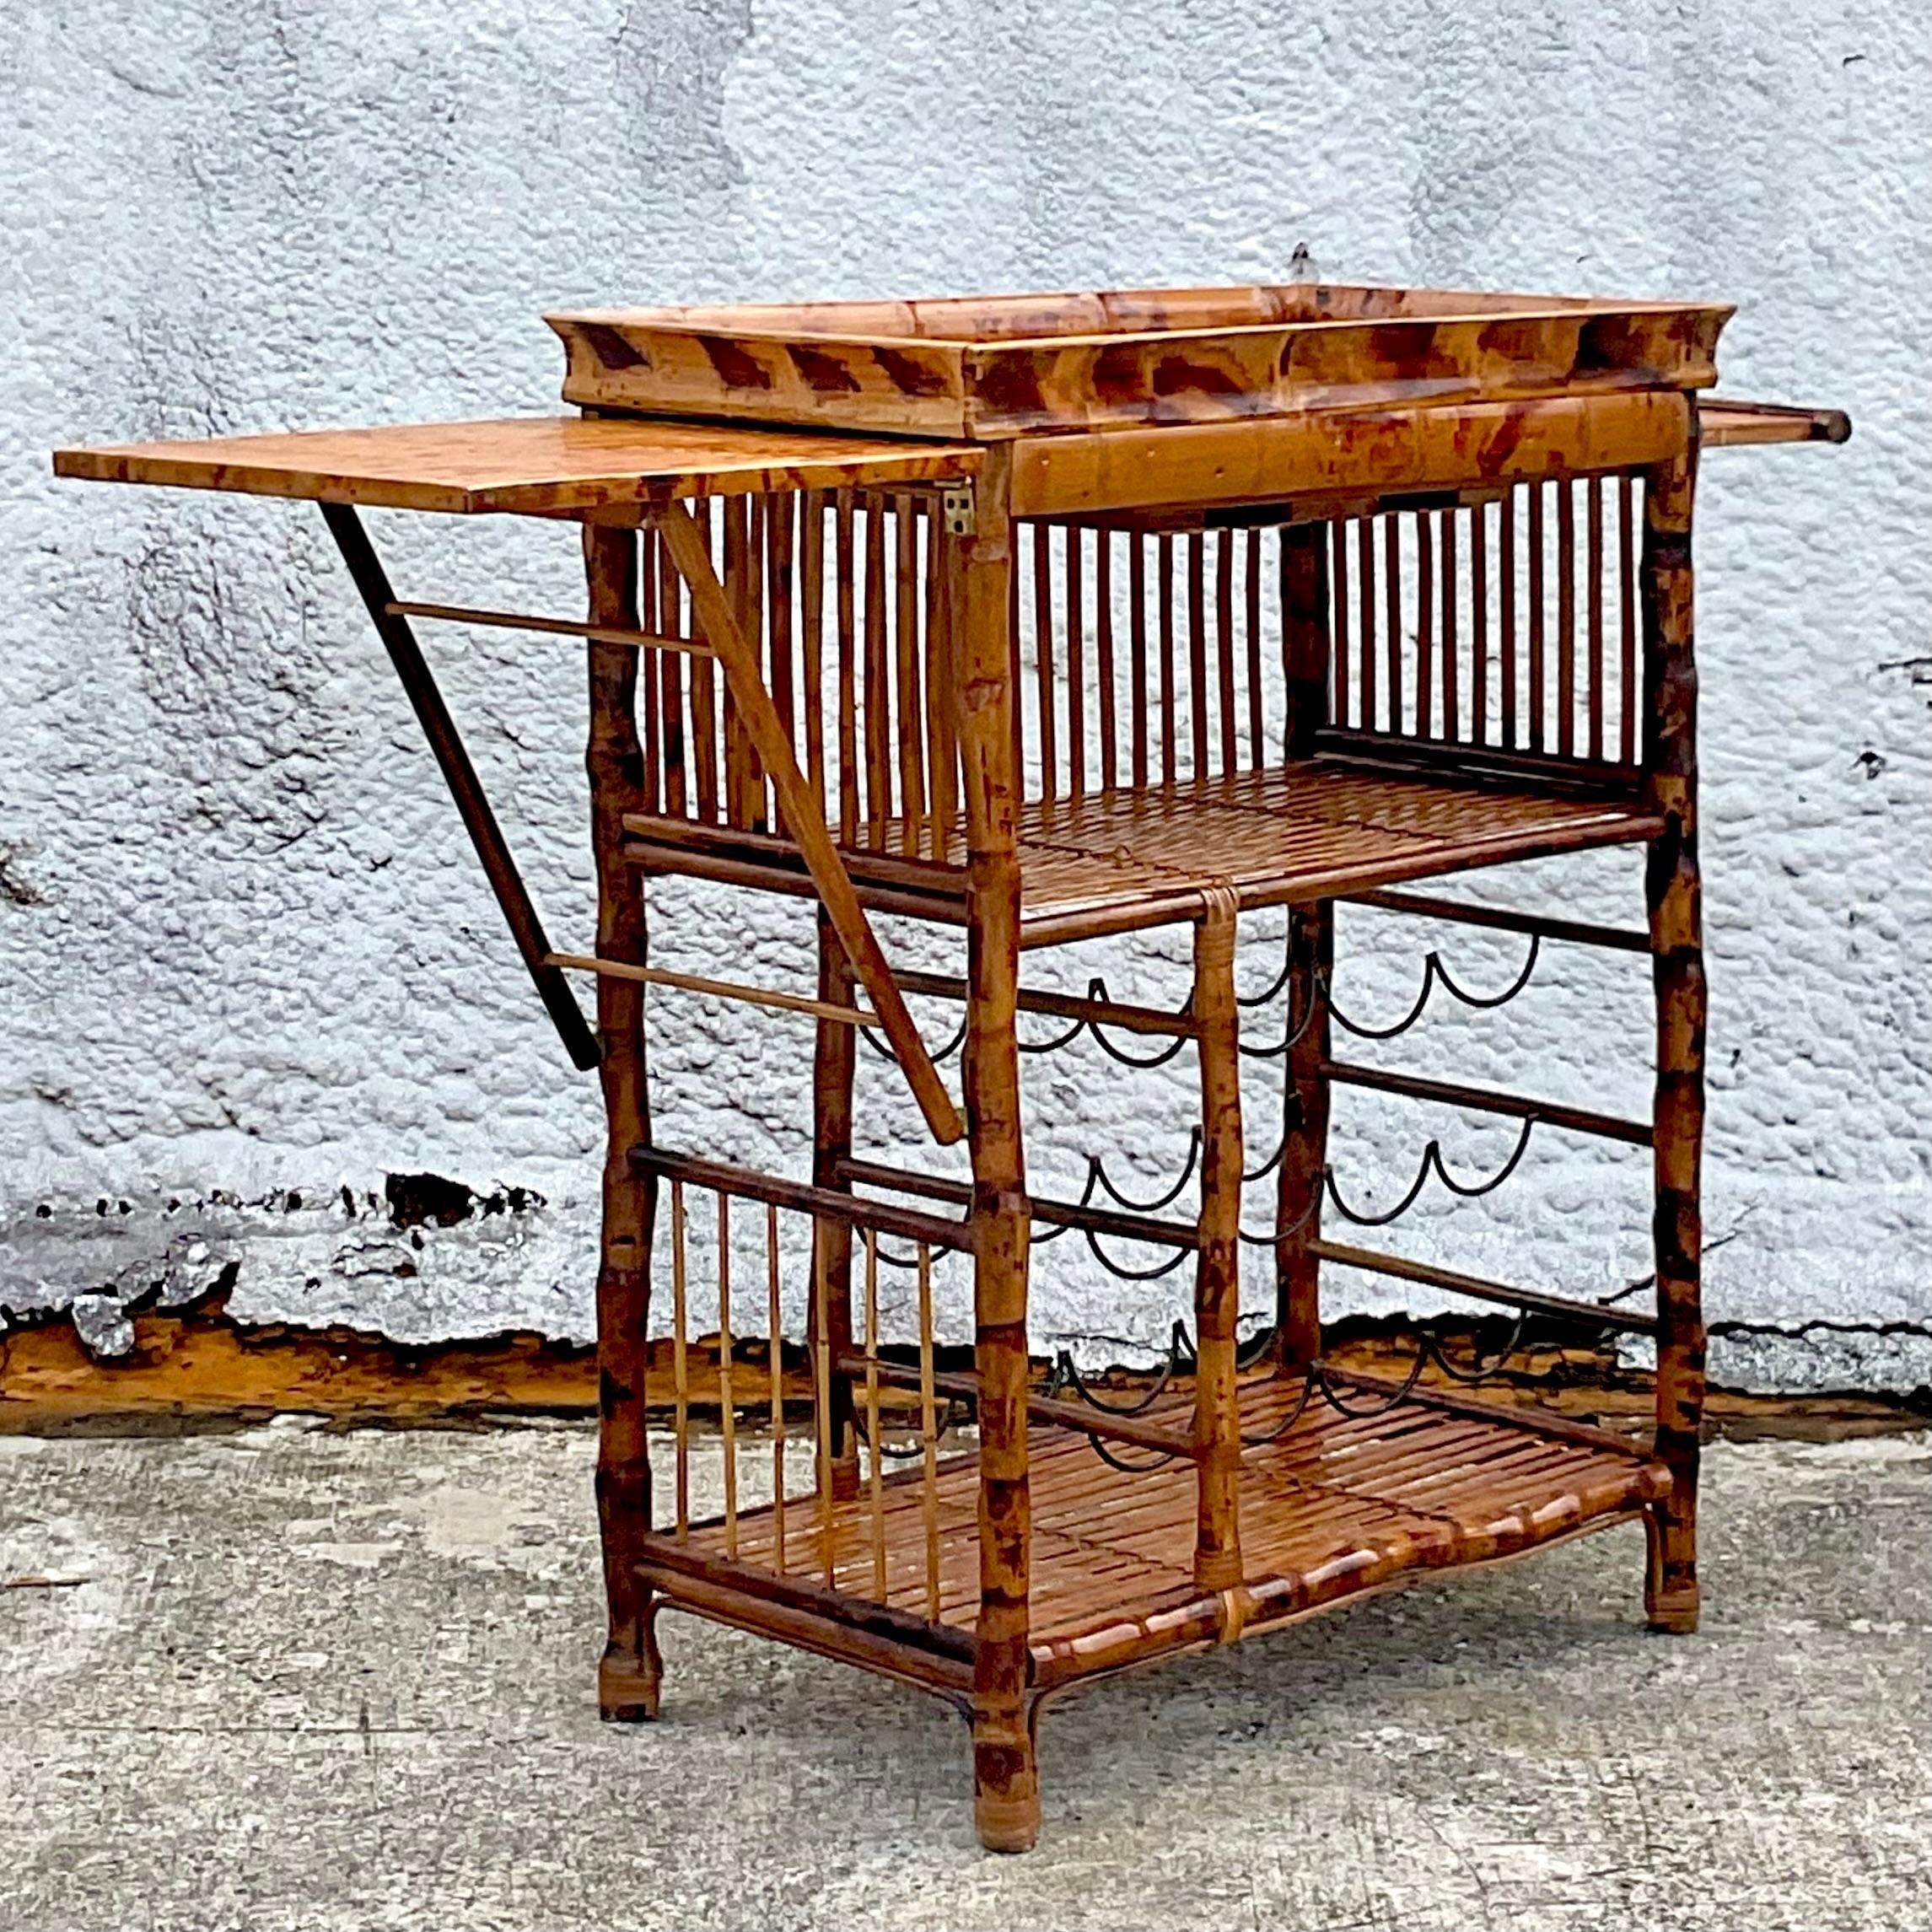 A fabulous vintage Coastal dry bar. A chic tortoise shell split bamboo with metal wire frame bottle holders. Extendable surface space that folds away for easy storage. Acquired from a Palm Beach estate.

Left side shelf 15.5
Right side pull out